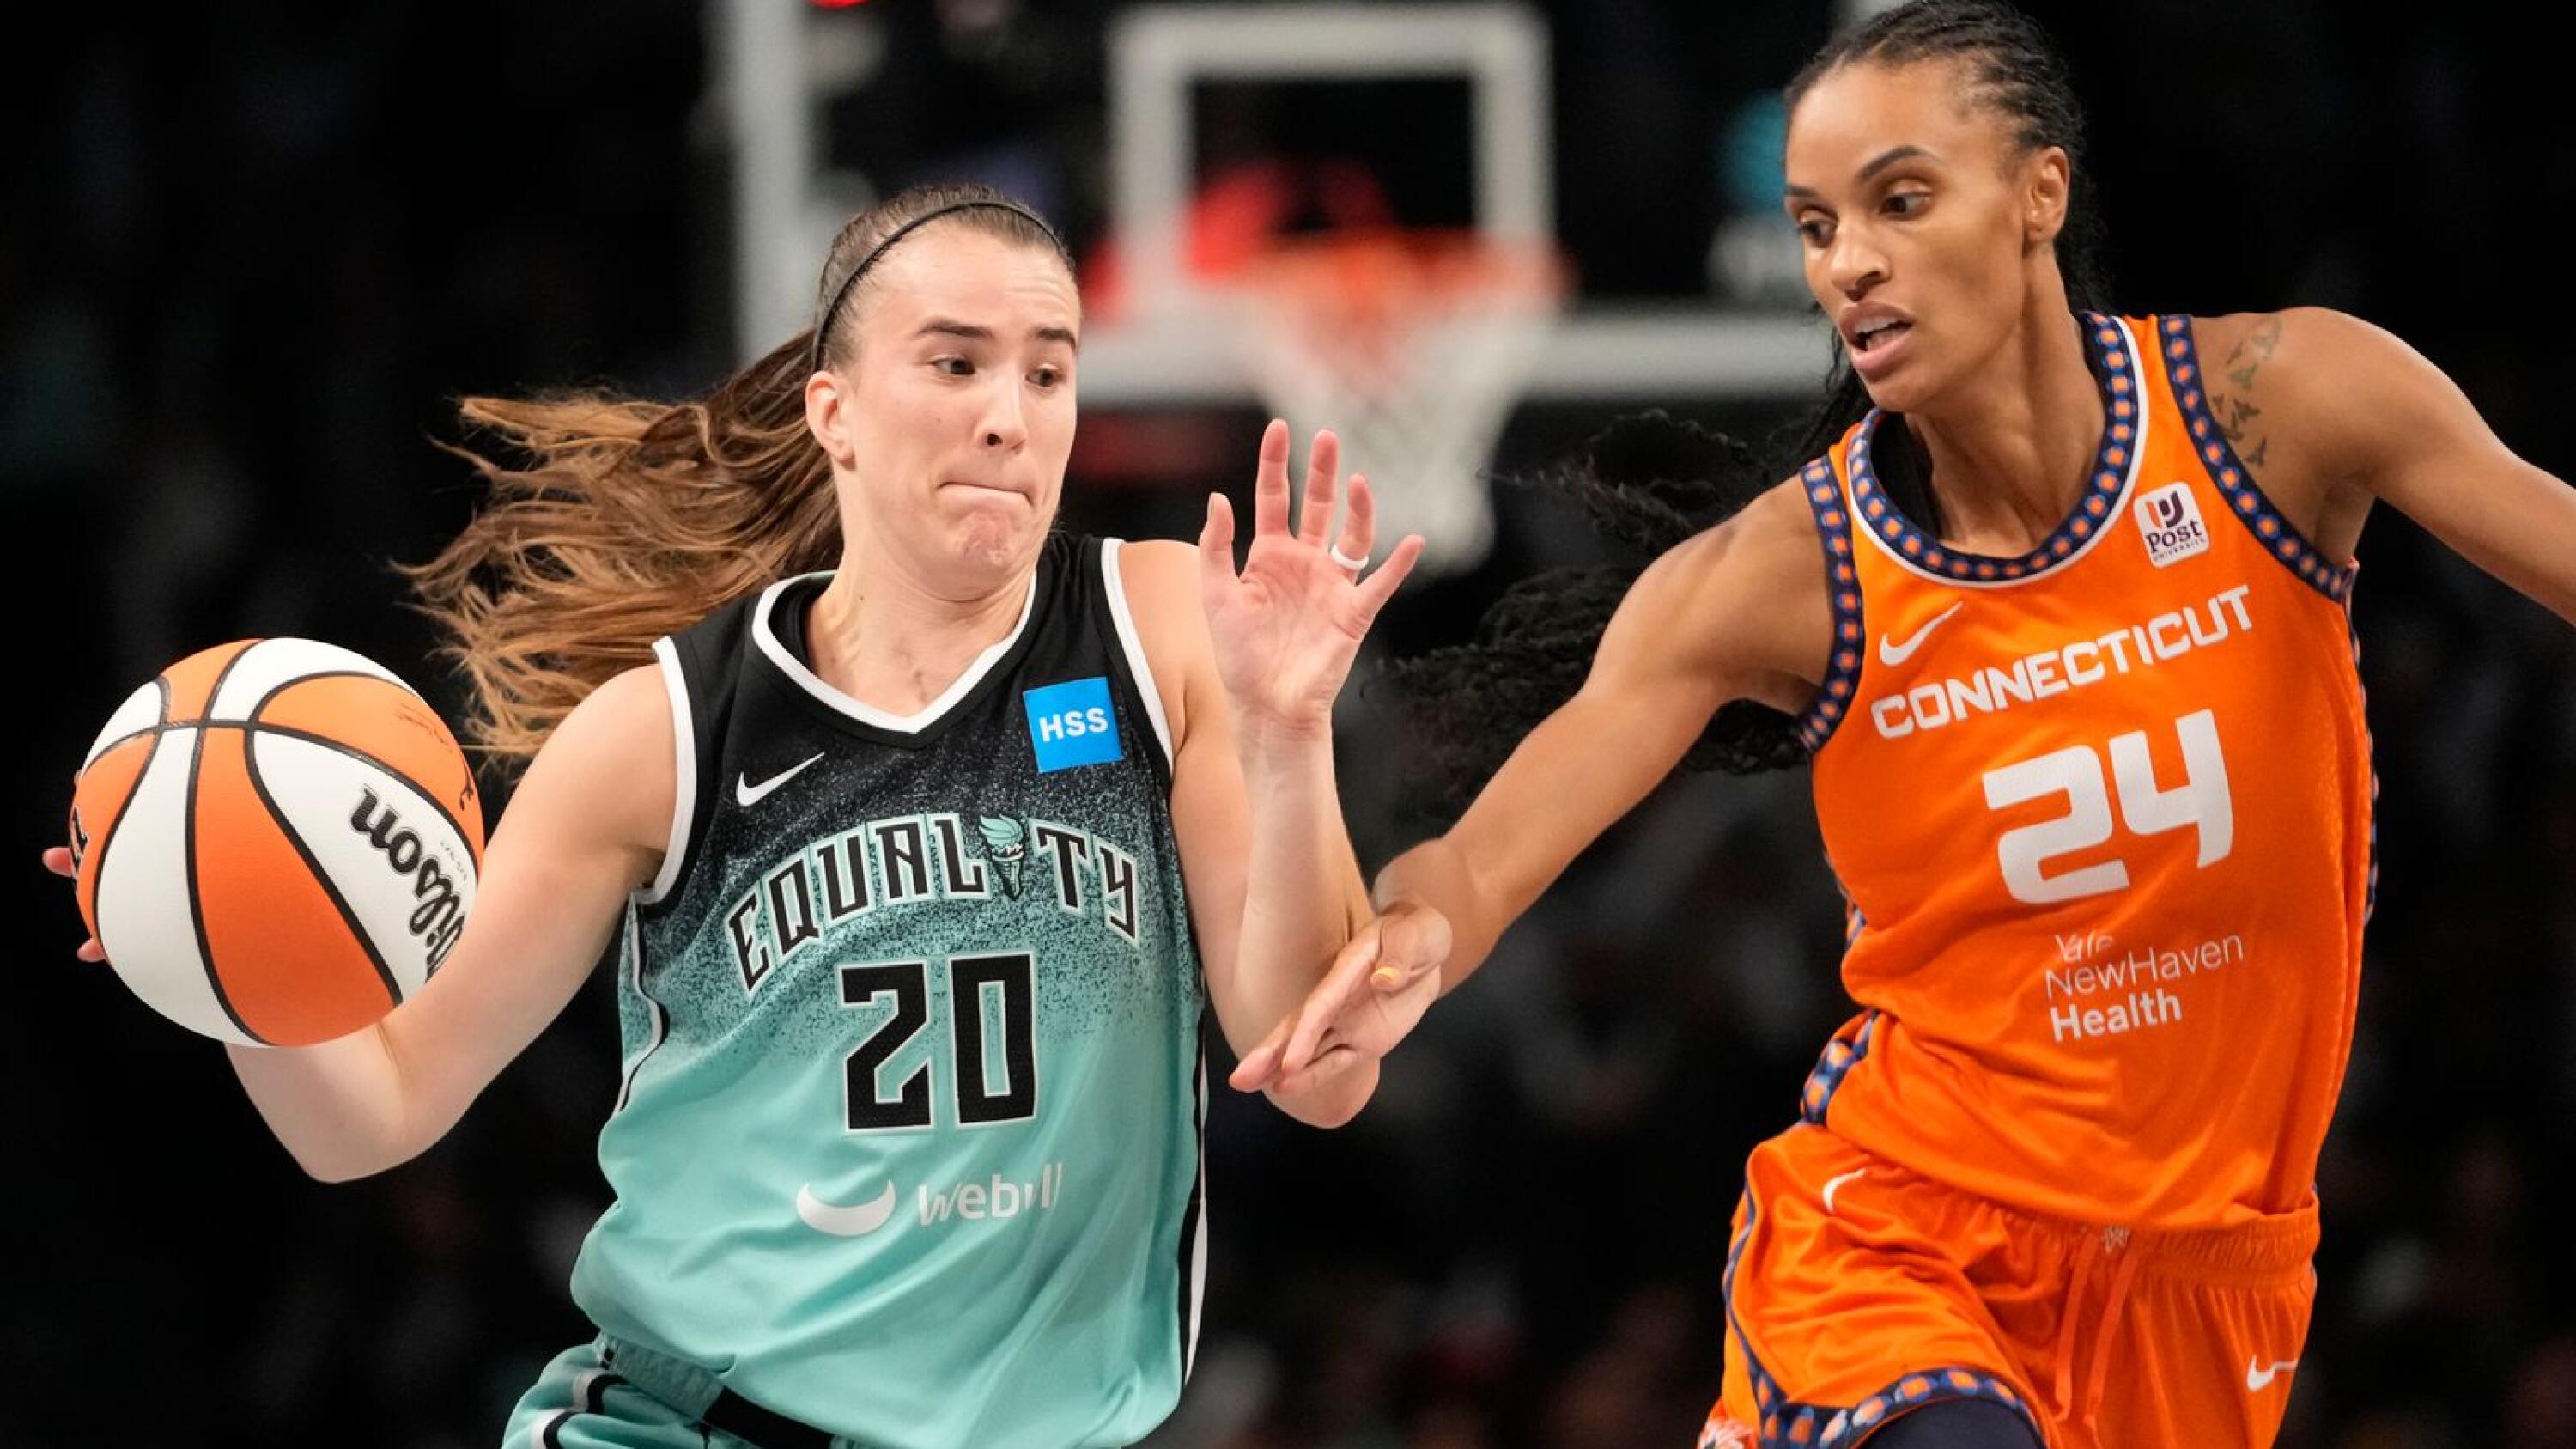 Liberty's Betnijah Laney named to her first WNBA All-Star team